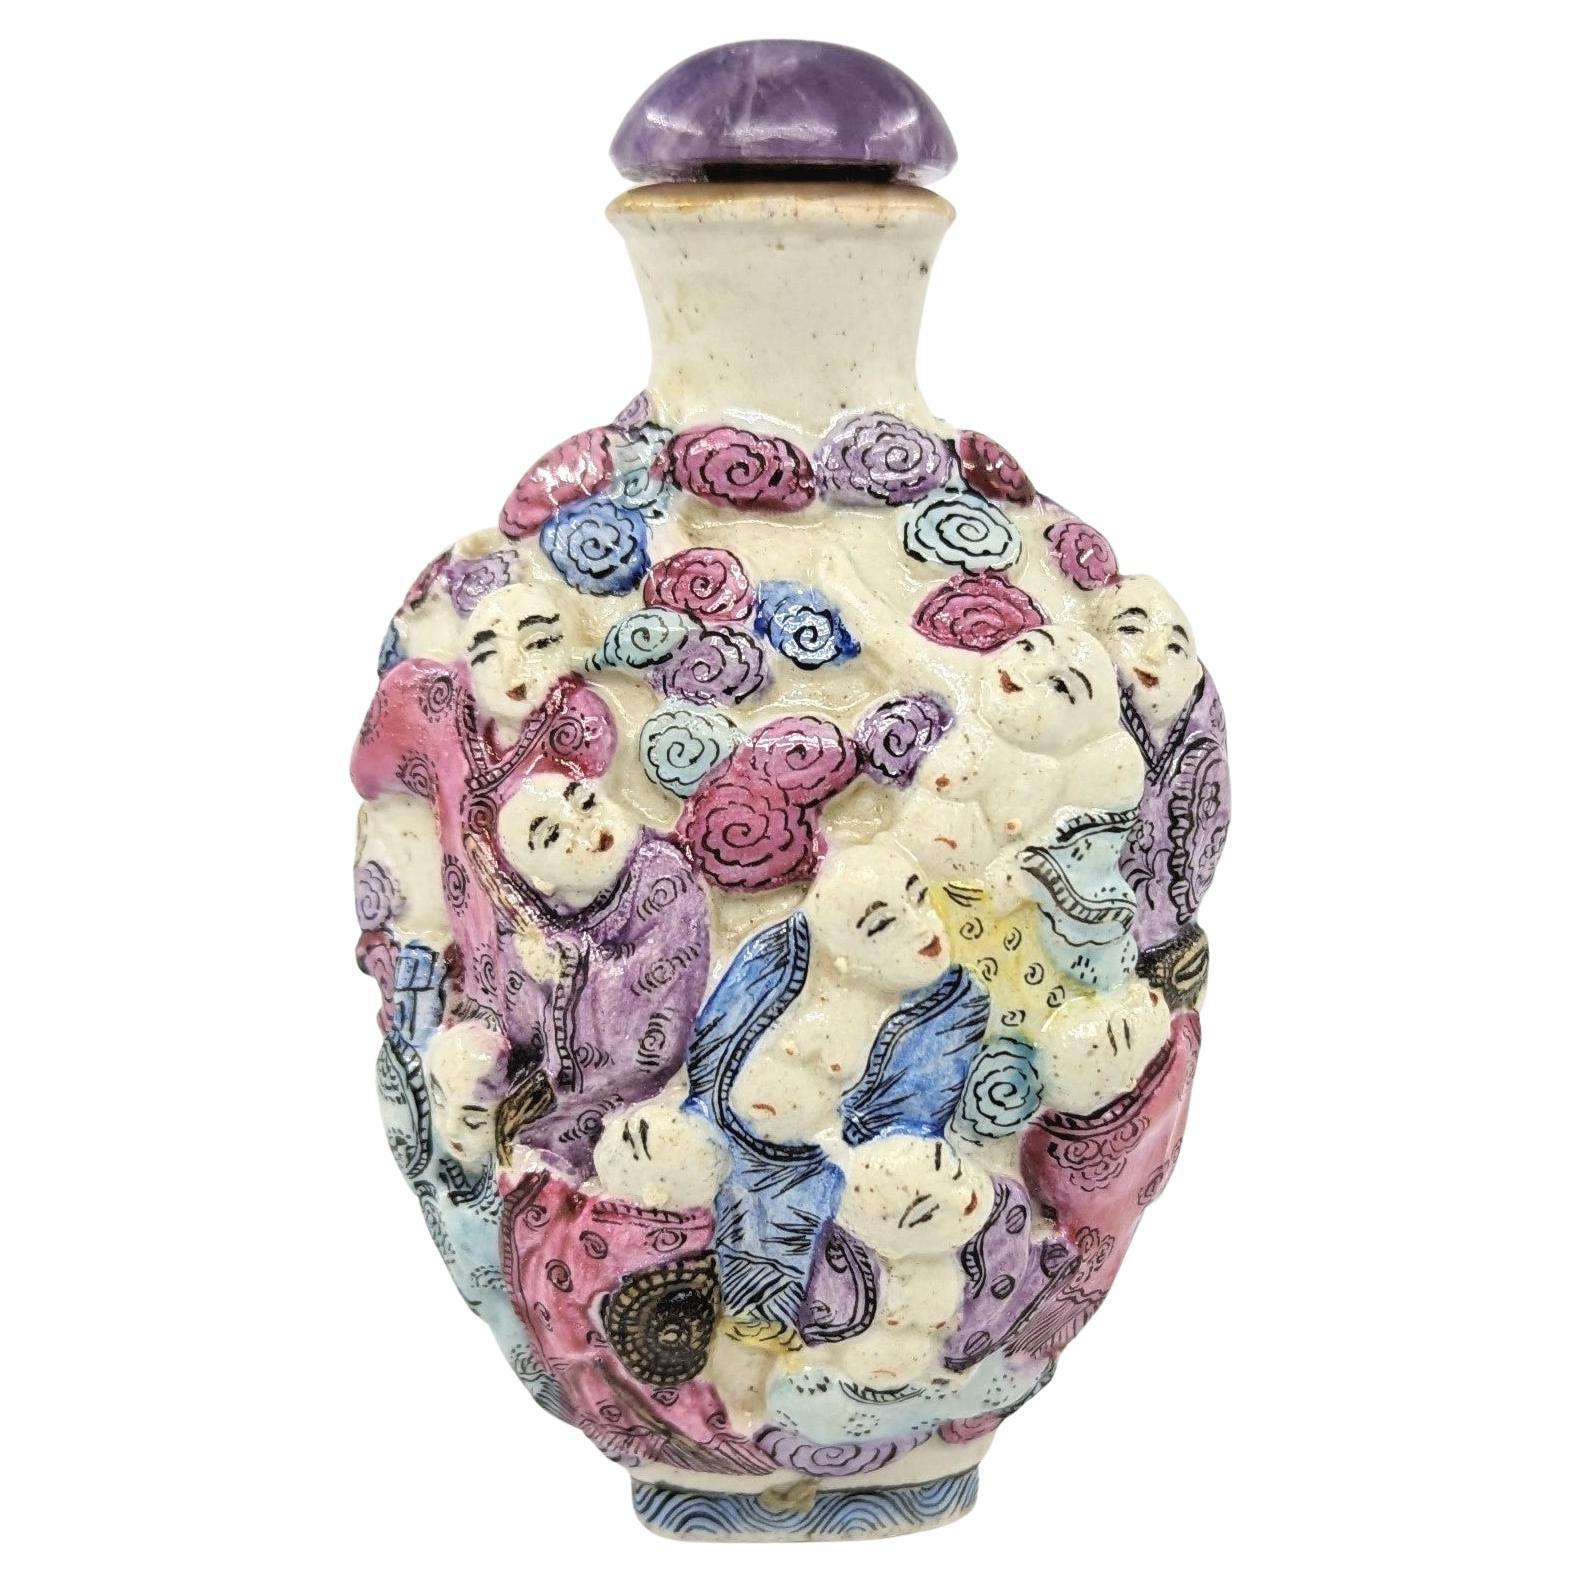 Antique Chinese moulded porcelain snuff bottle in compressed ovoid form, finely decorated in poly-chrome fencai with 18 Arhats Luohan in a continuous scene in high relief, with an outward flaring neck and mouth ring glazed in gold. Four character